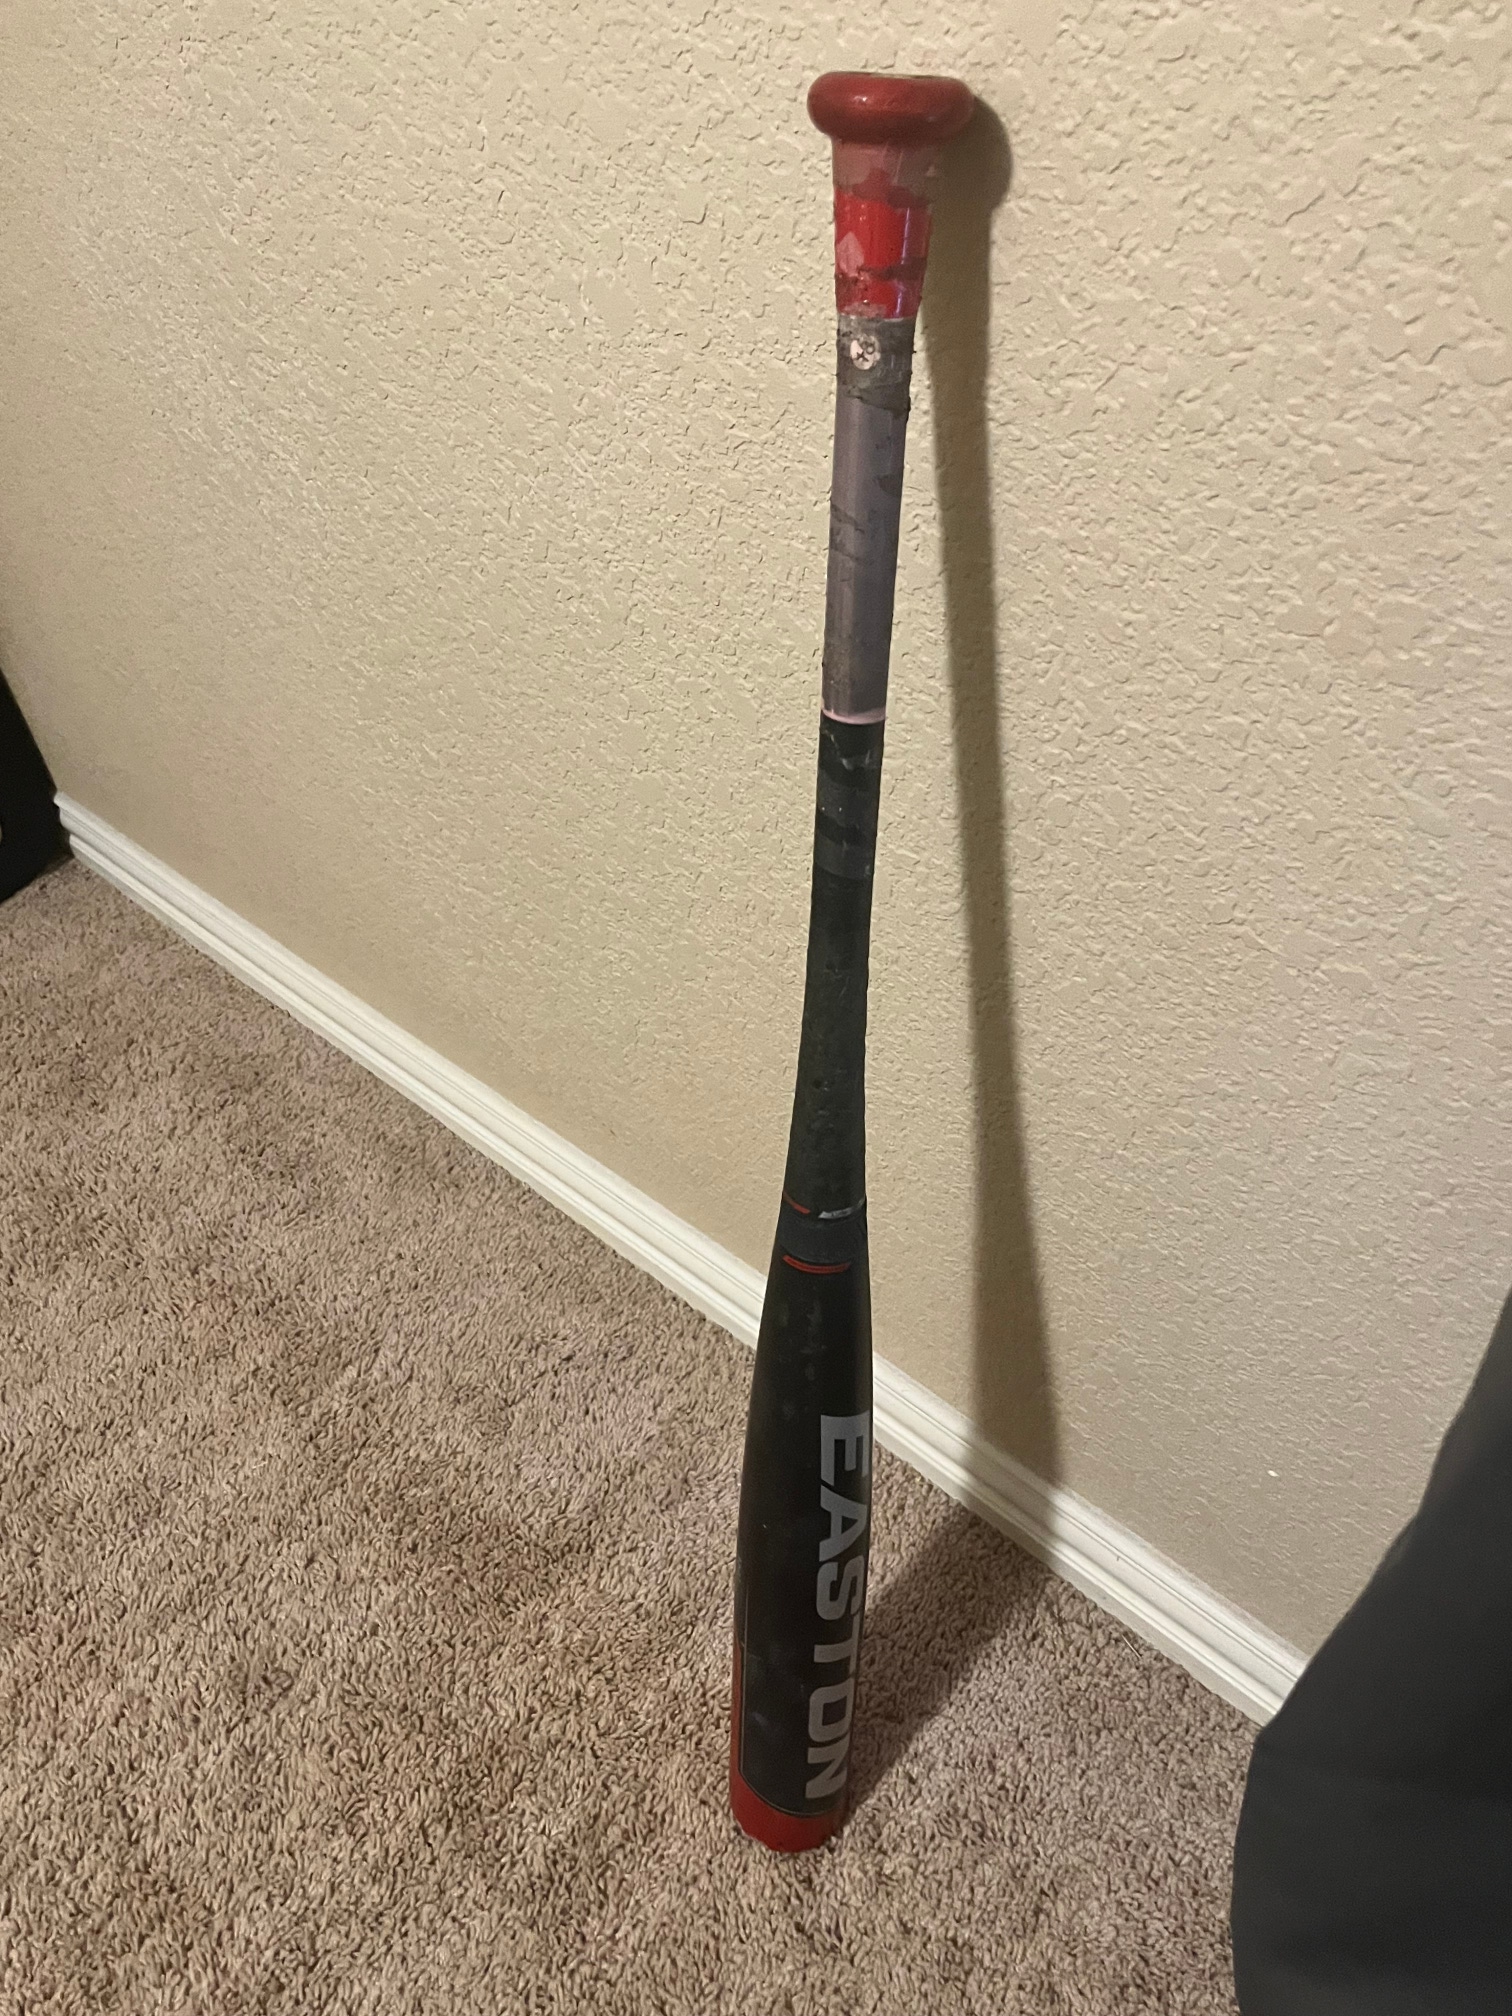 Used BBCOR Certified Easton Hype Comp Bat (-3) 30 oz 33"